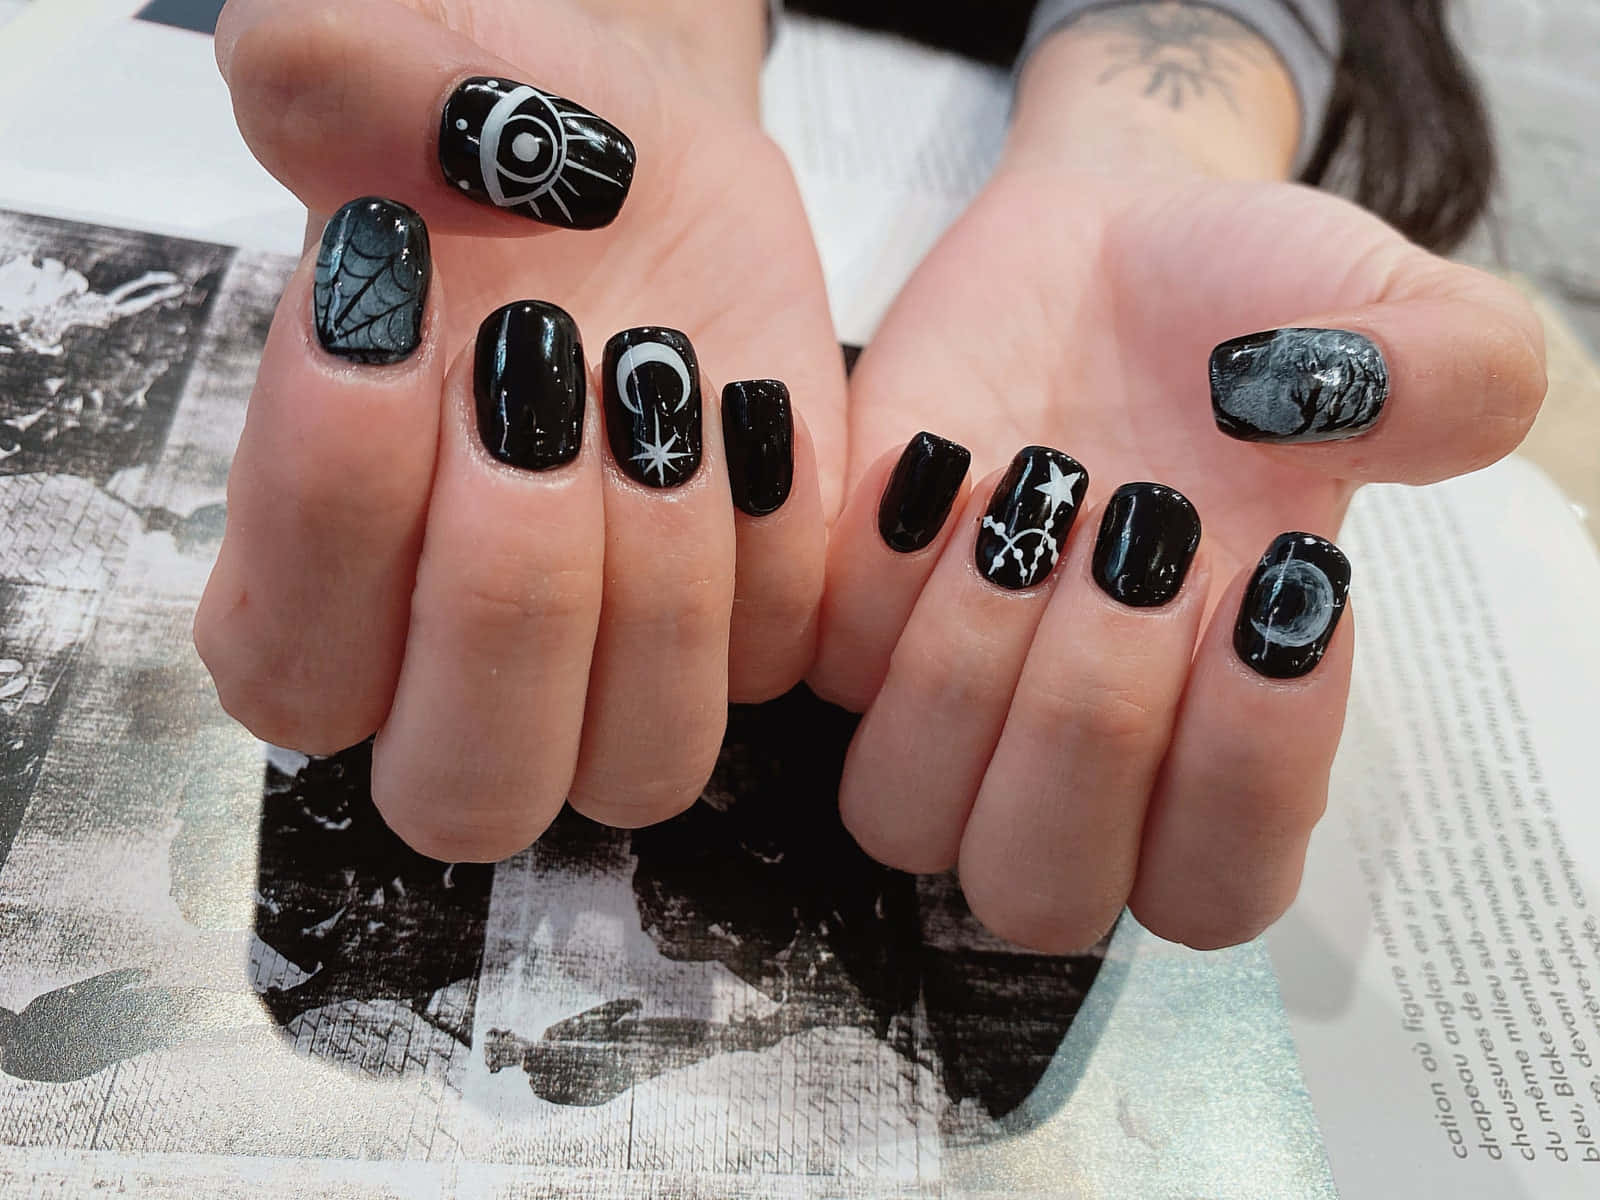 Get into the spooky spirit with this spooky and stylish Halloween nail art! Wallpaper